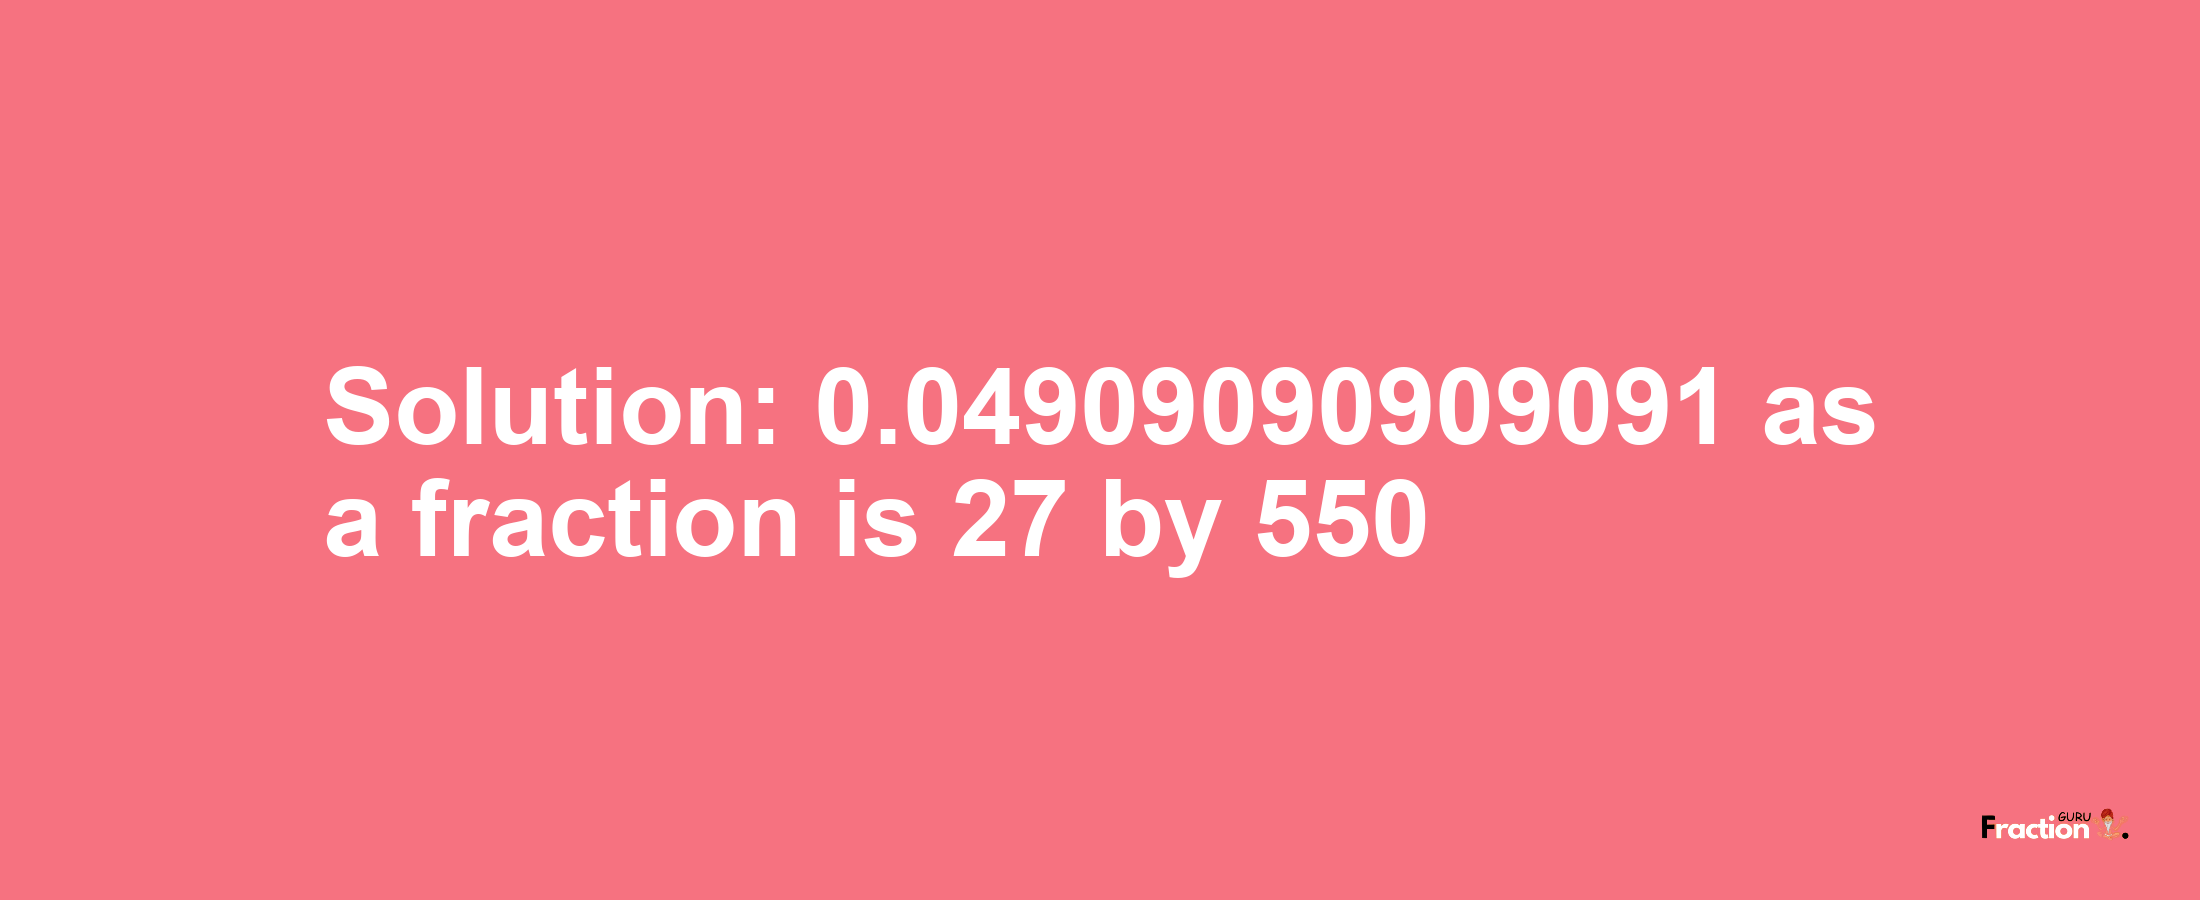 Solution:0.04909090909091 as a fraction is 27/550